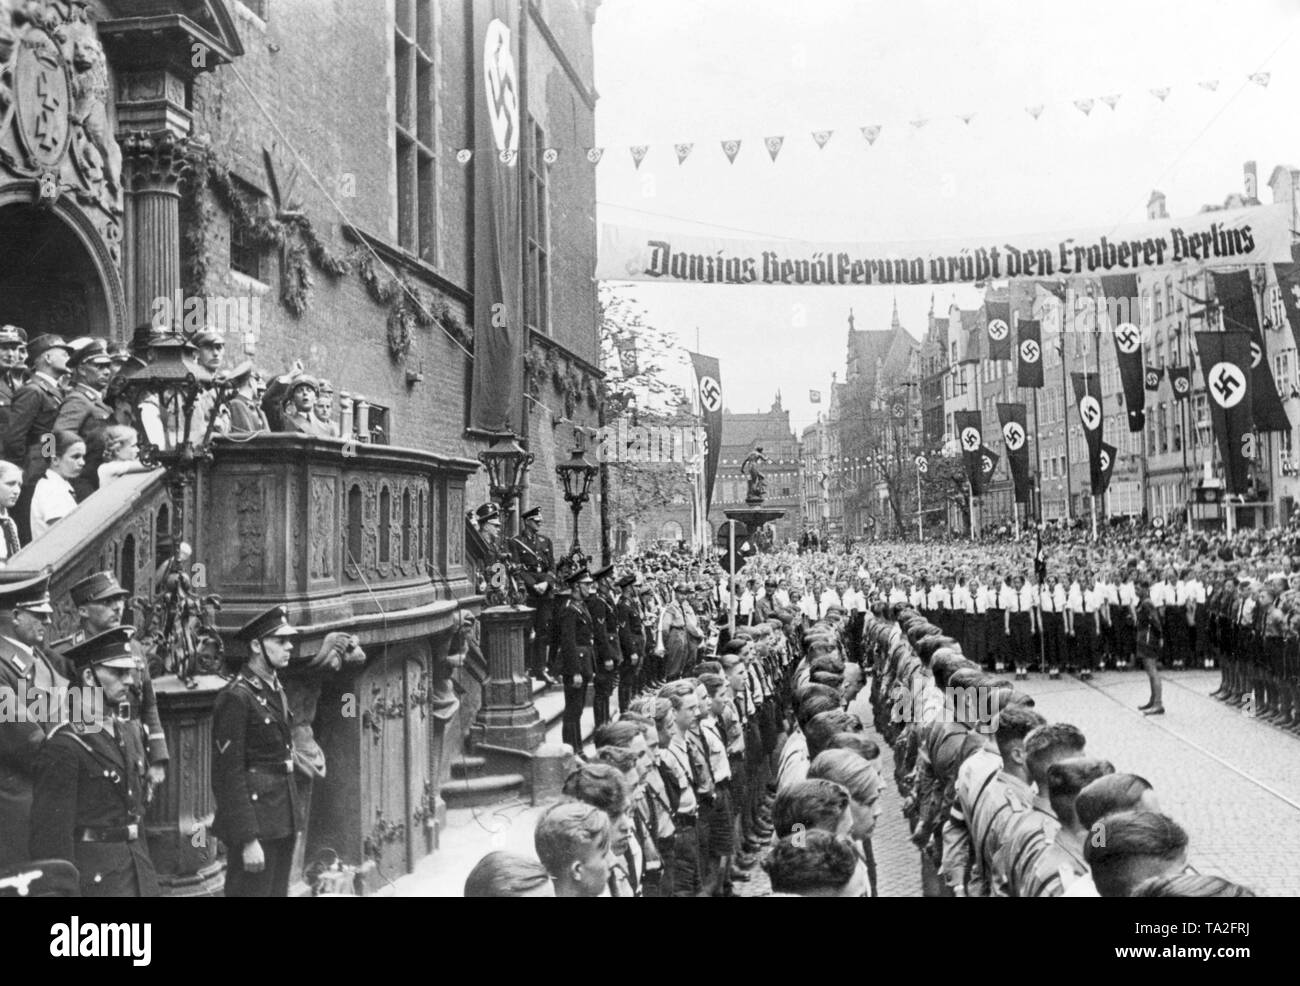 During his visit to Gdansk, the Minister of Propaganda, Joseph Goebbels, addresses to members of the Gdansk Youth Hitler Youth and BDM in front of the Town Hall of Gdansk. Across the street is a banner reading: 'Danzig's population greets the conqueror of Berlin.' The stairs of the Town Hall are guarded by SS and SA members. Stock Photo